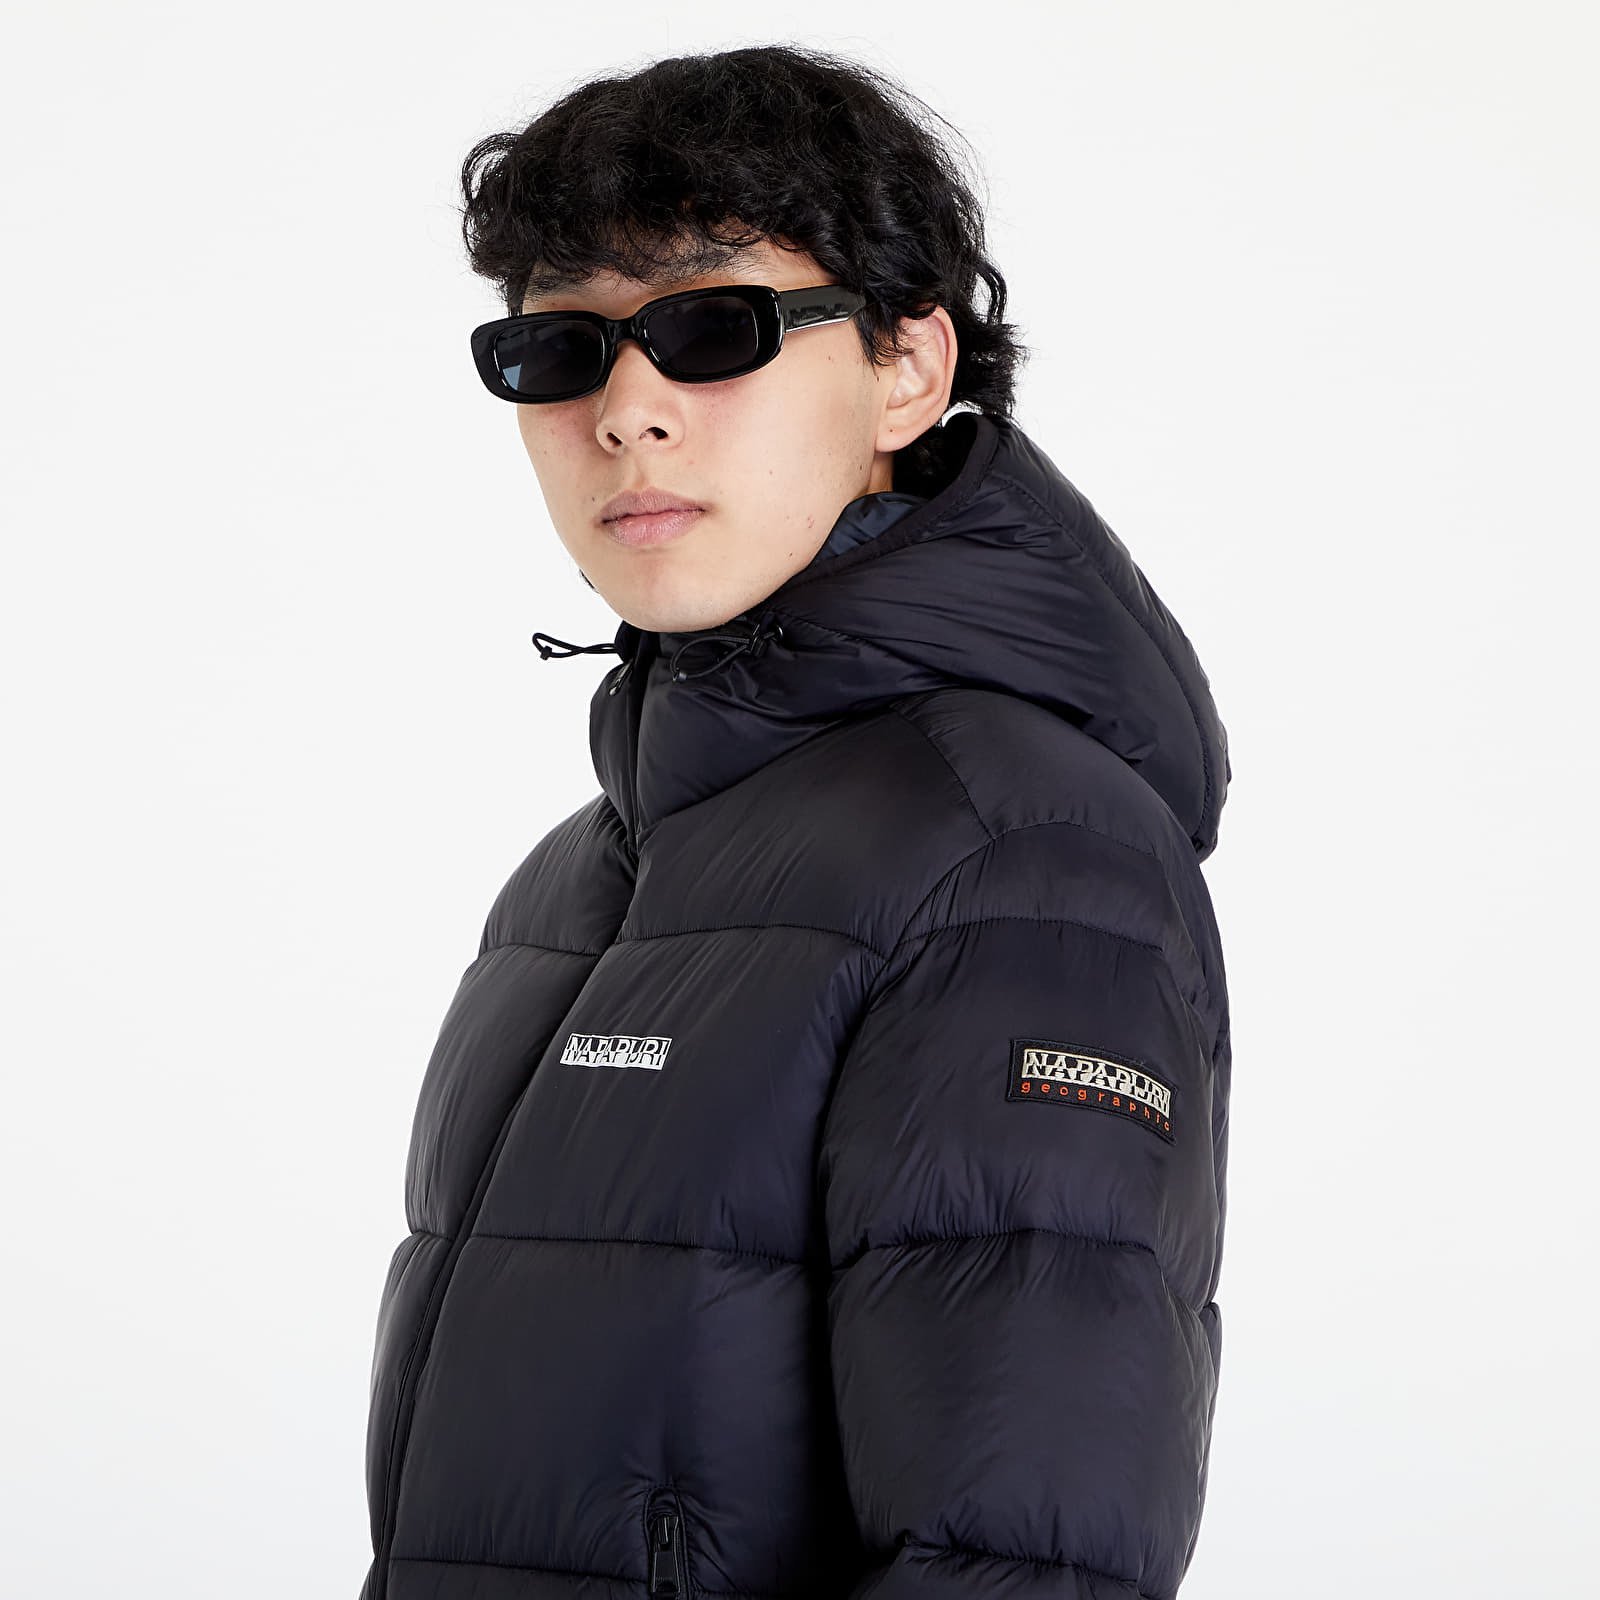 A-Suomi Hooded Jacket 1